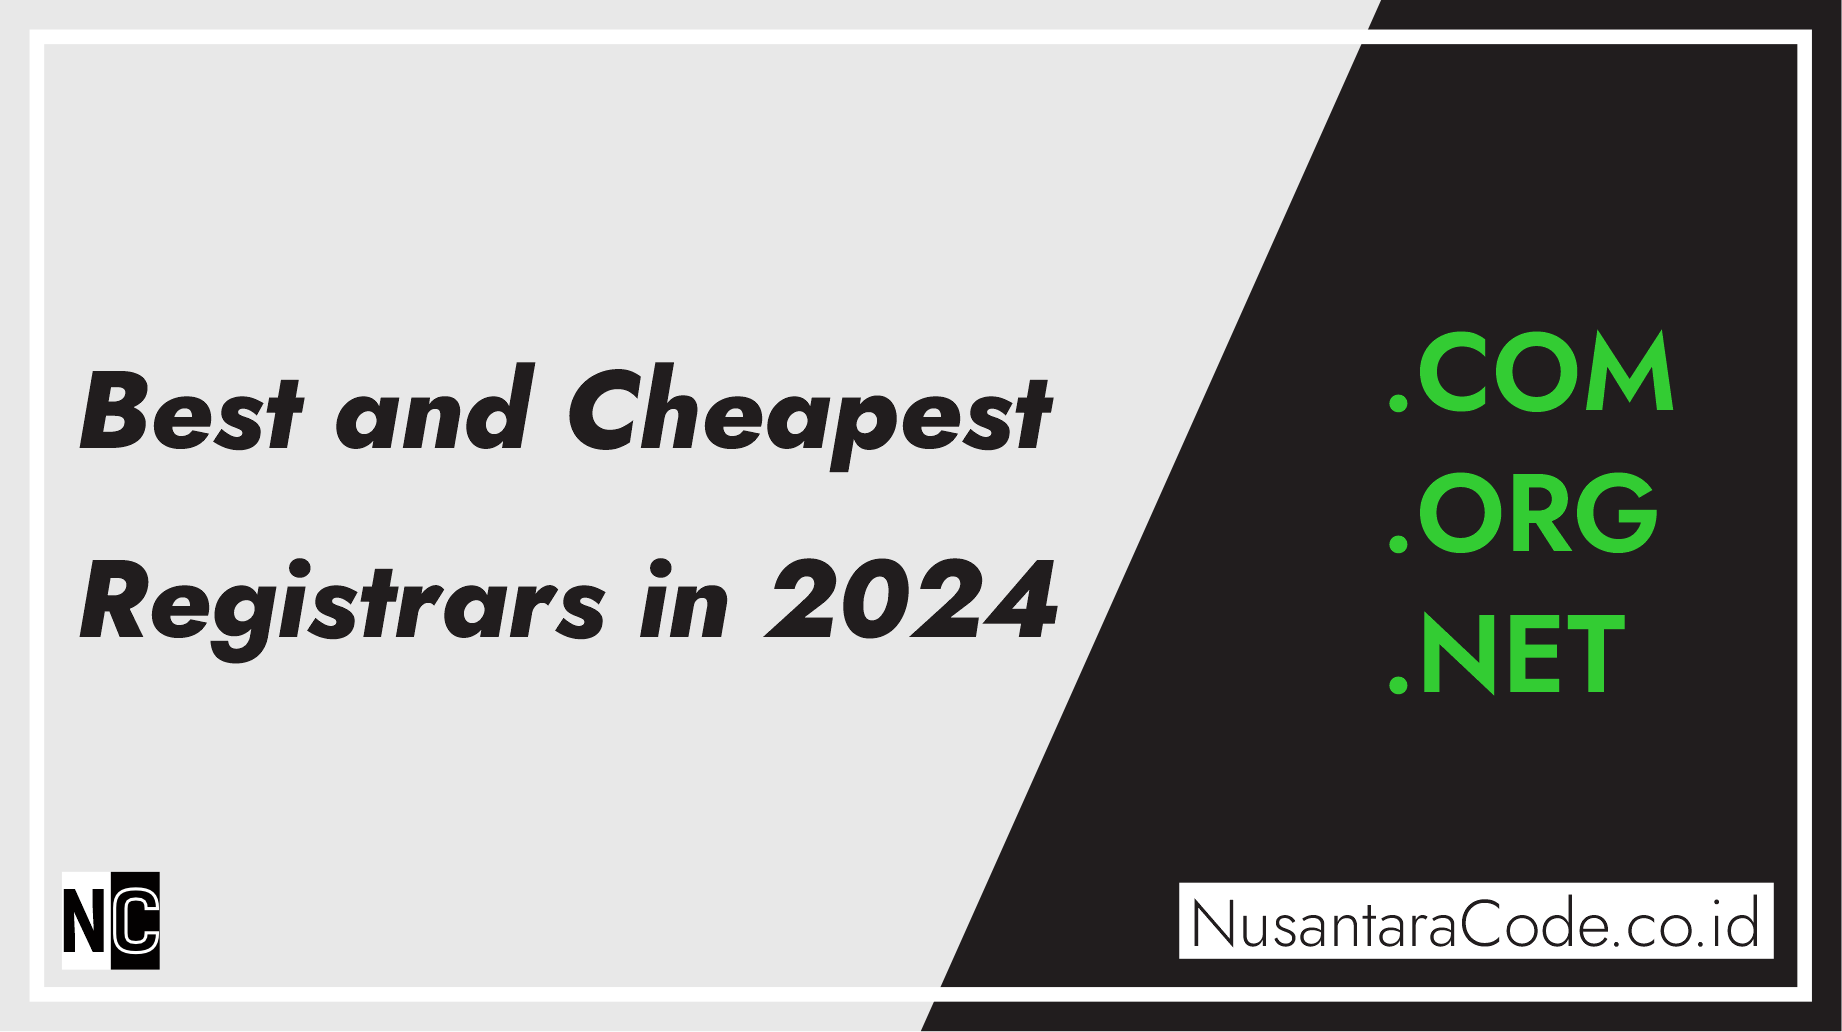 Finding Your Perfect Domain: Best and Cheapest Registrars in 2024